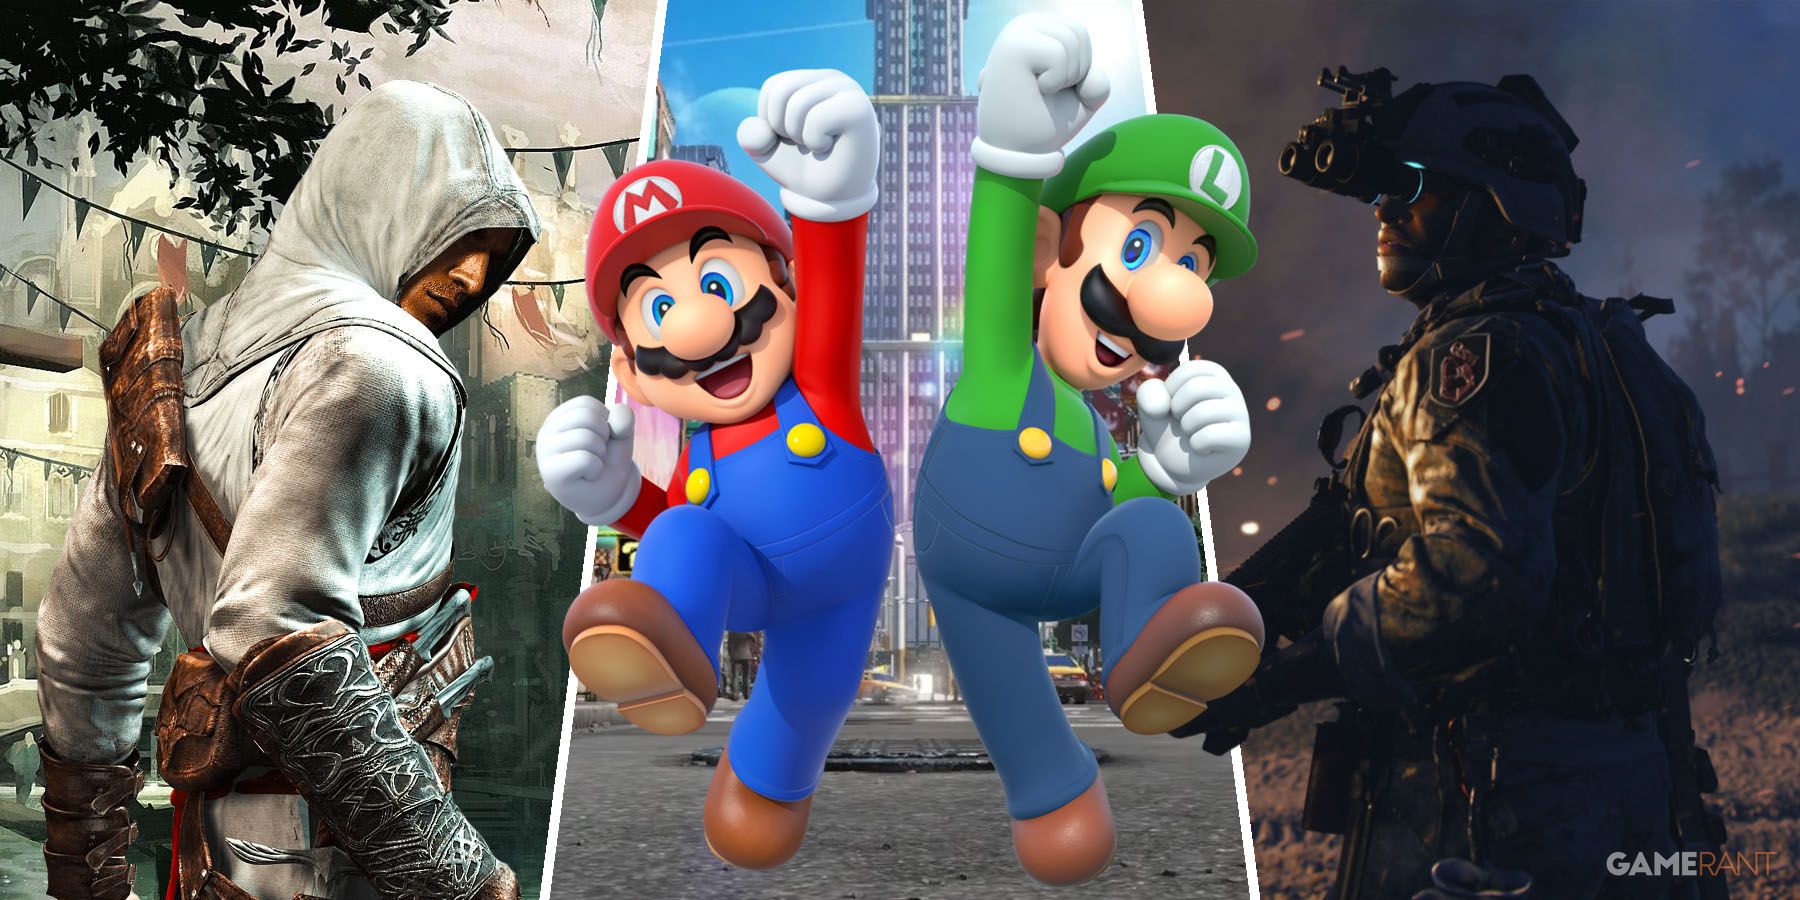 Assassin's Creed, Super Mario Bros. and Call of Duty